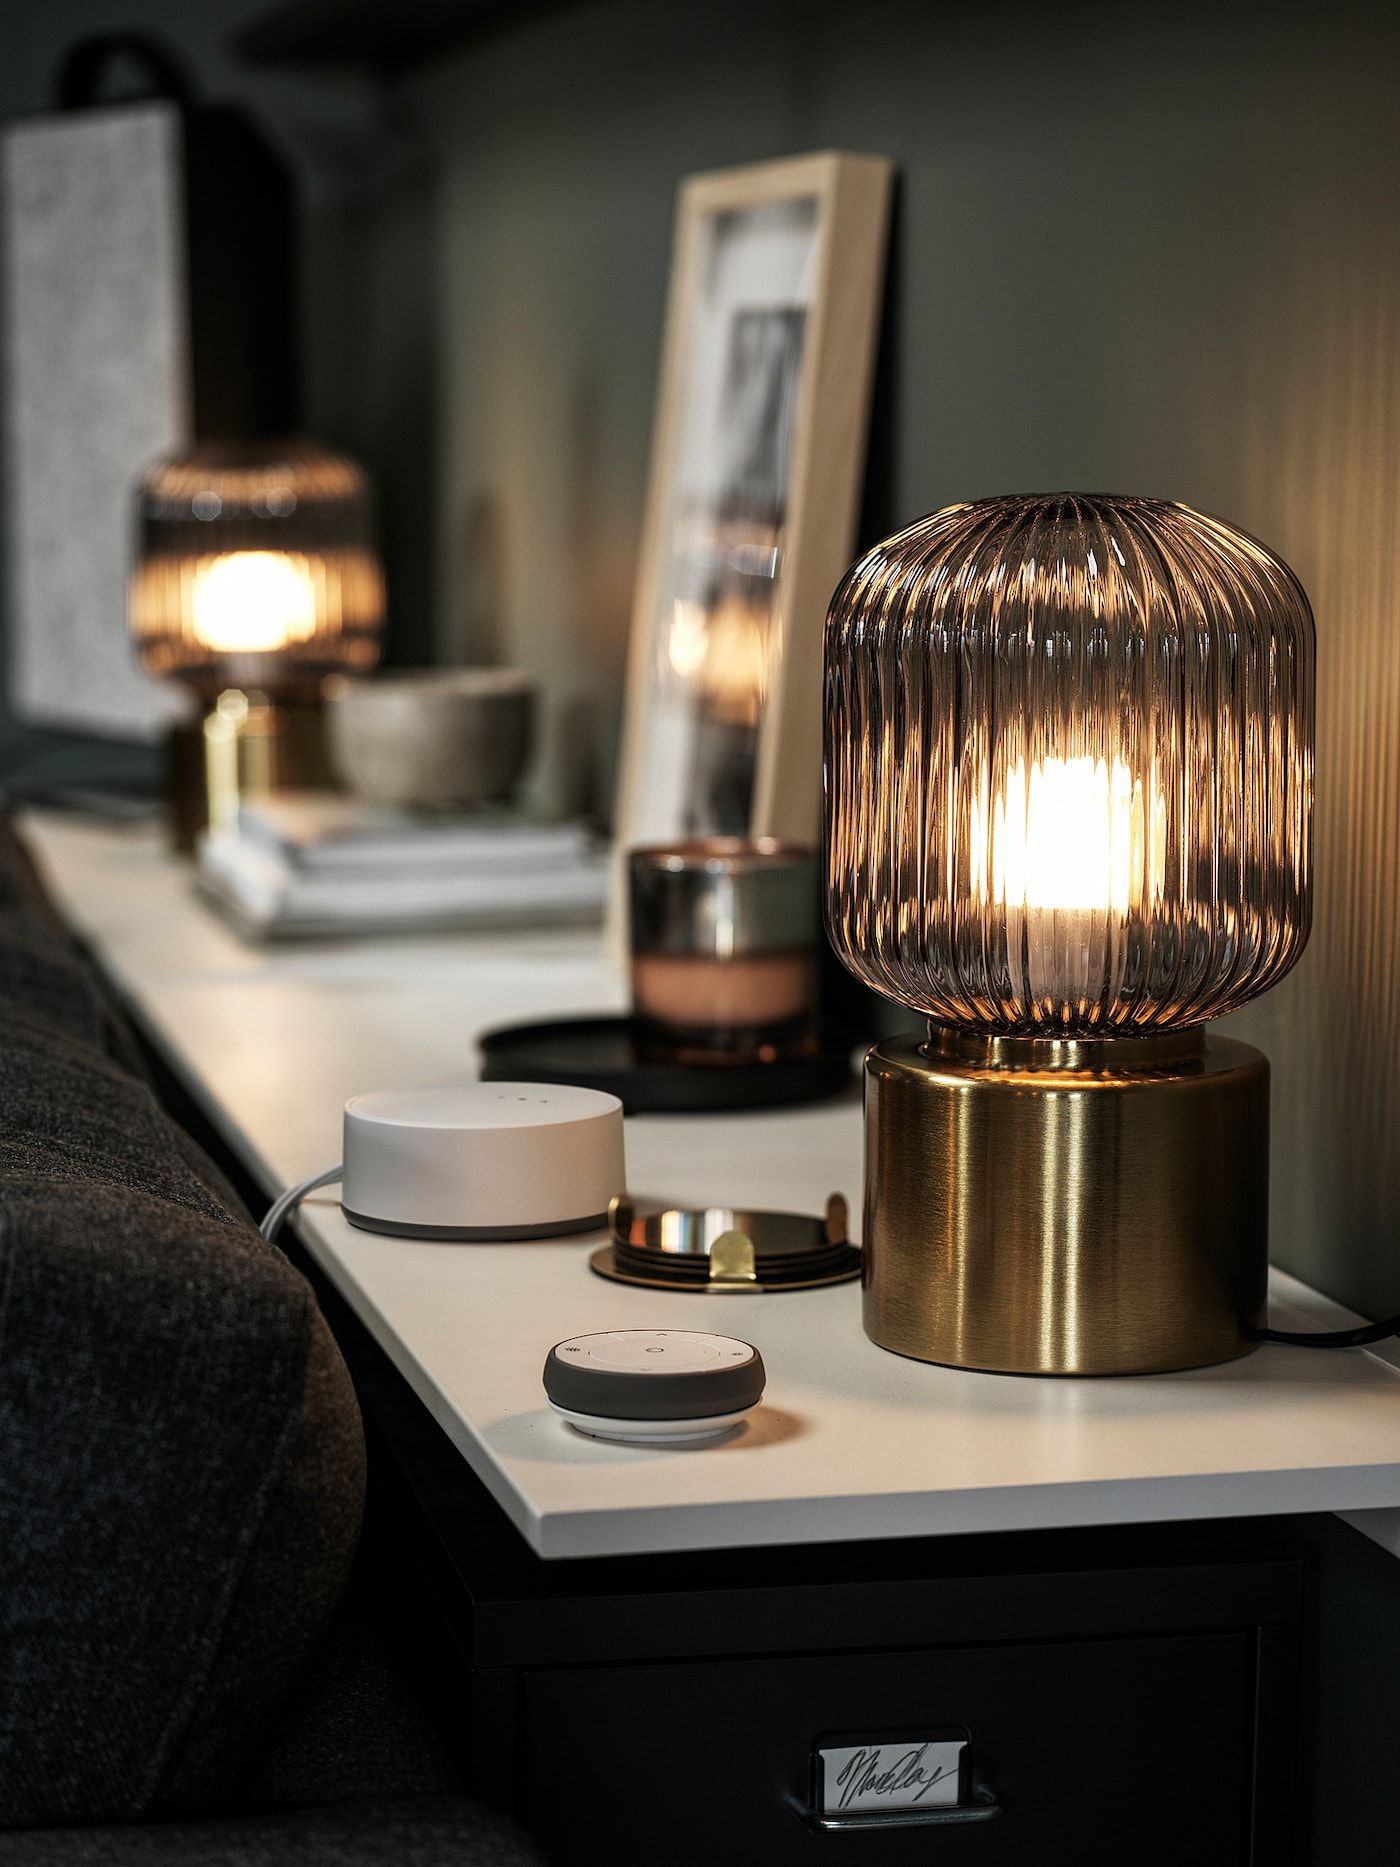 Glass Table Lamps Illuminate Your Room  with Classy Style